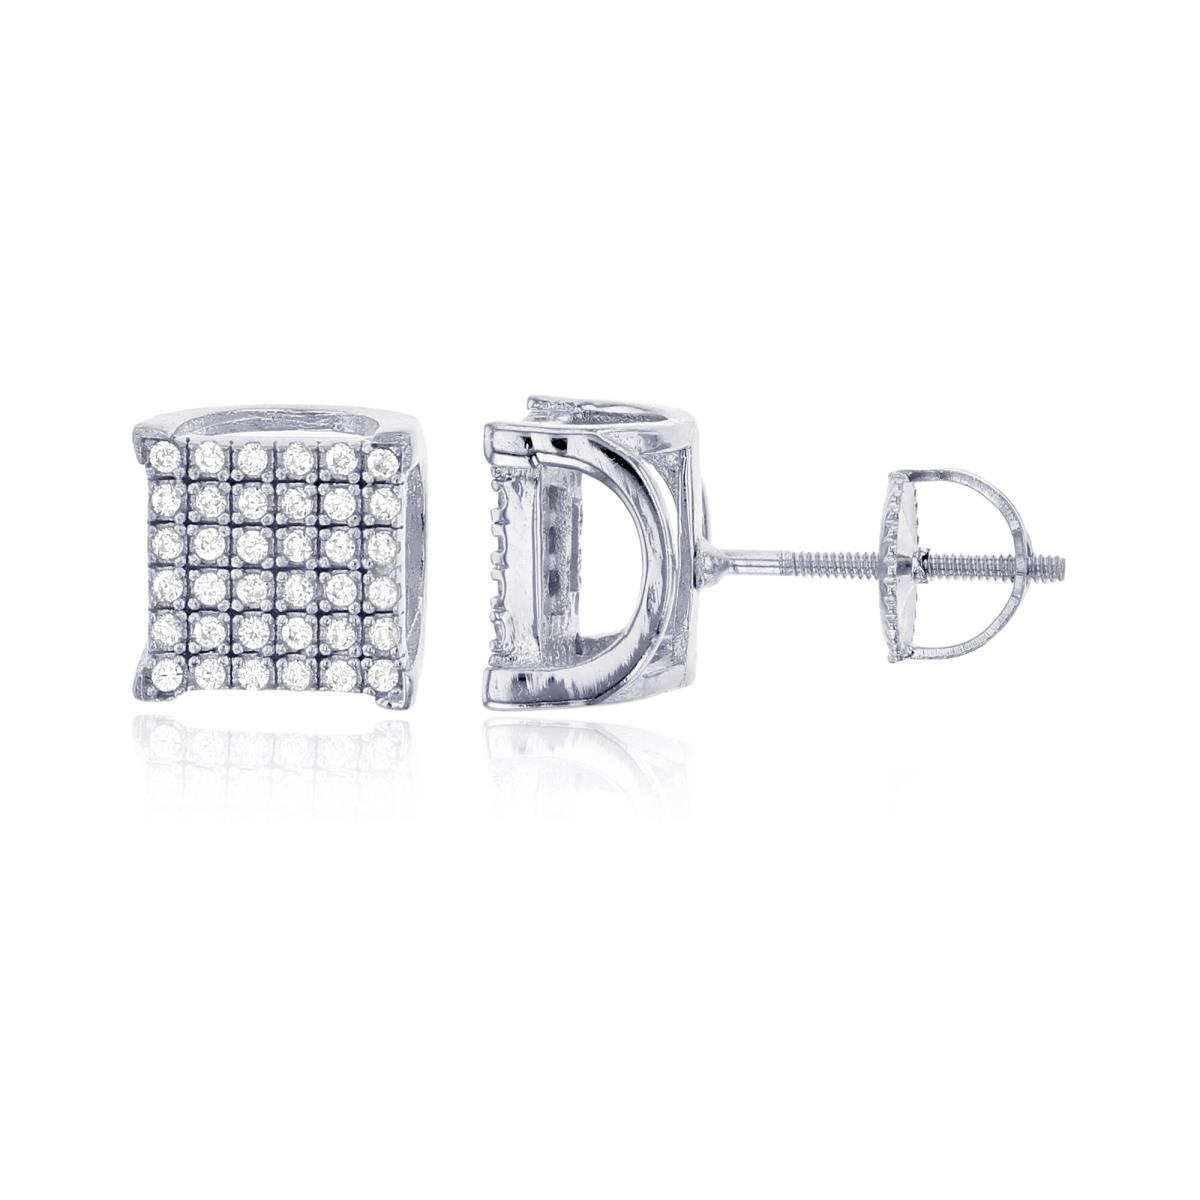 Sterling Silver 12x12mm 3D Square Screwback Stud Earring